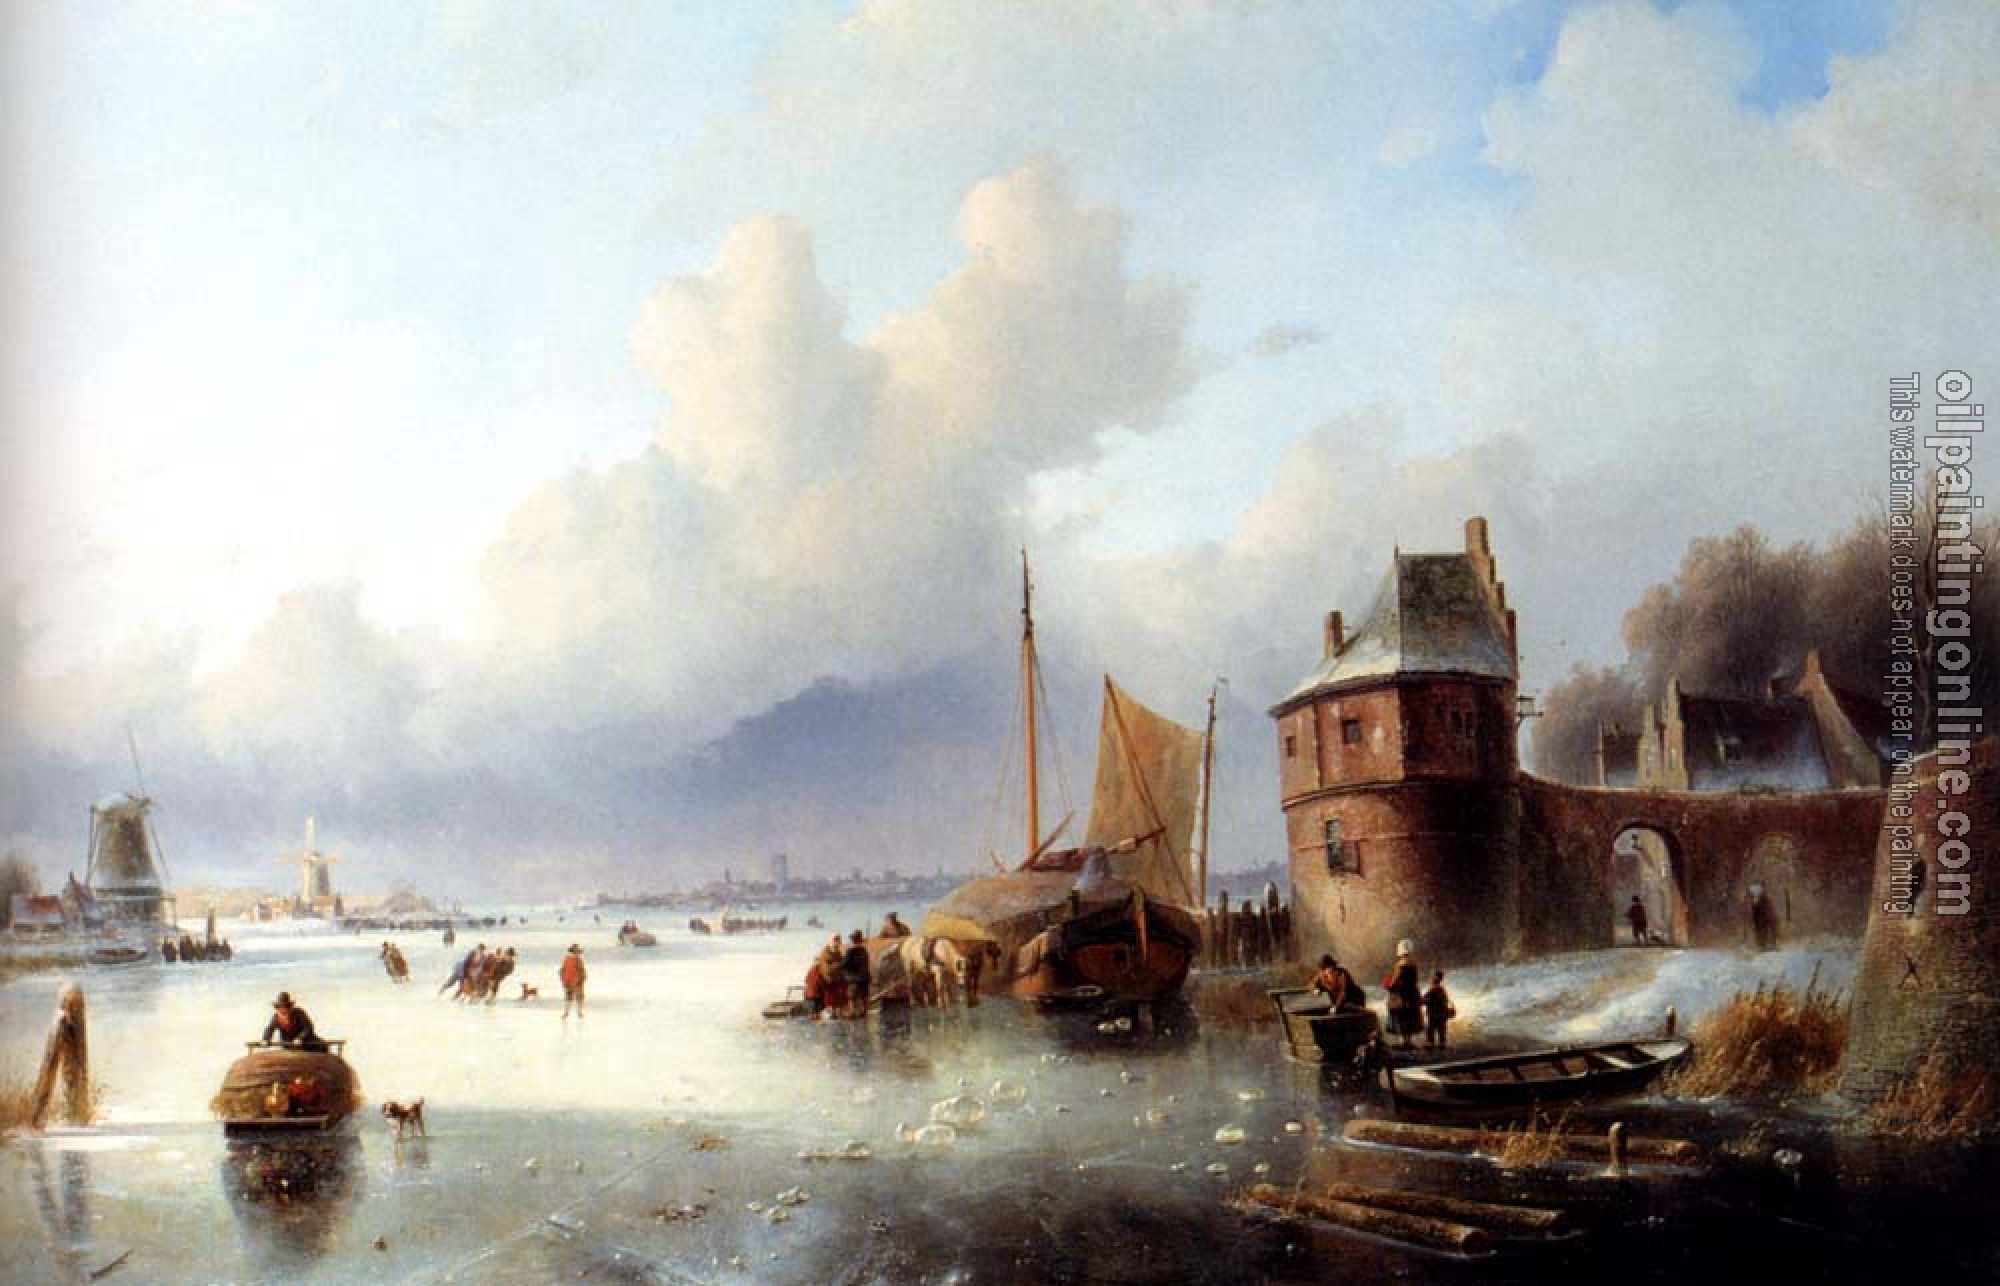 Jan Jacob Coenraad Spohler - A Winter Landscape With Numerous Skaters On A Frozen Waterway